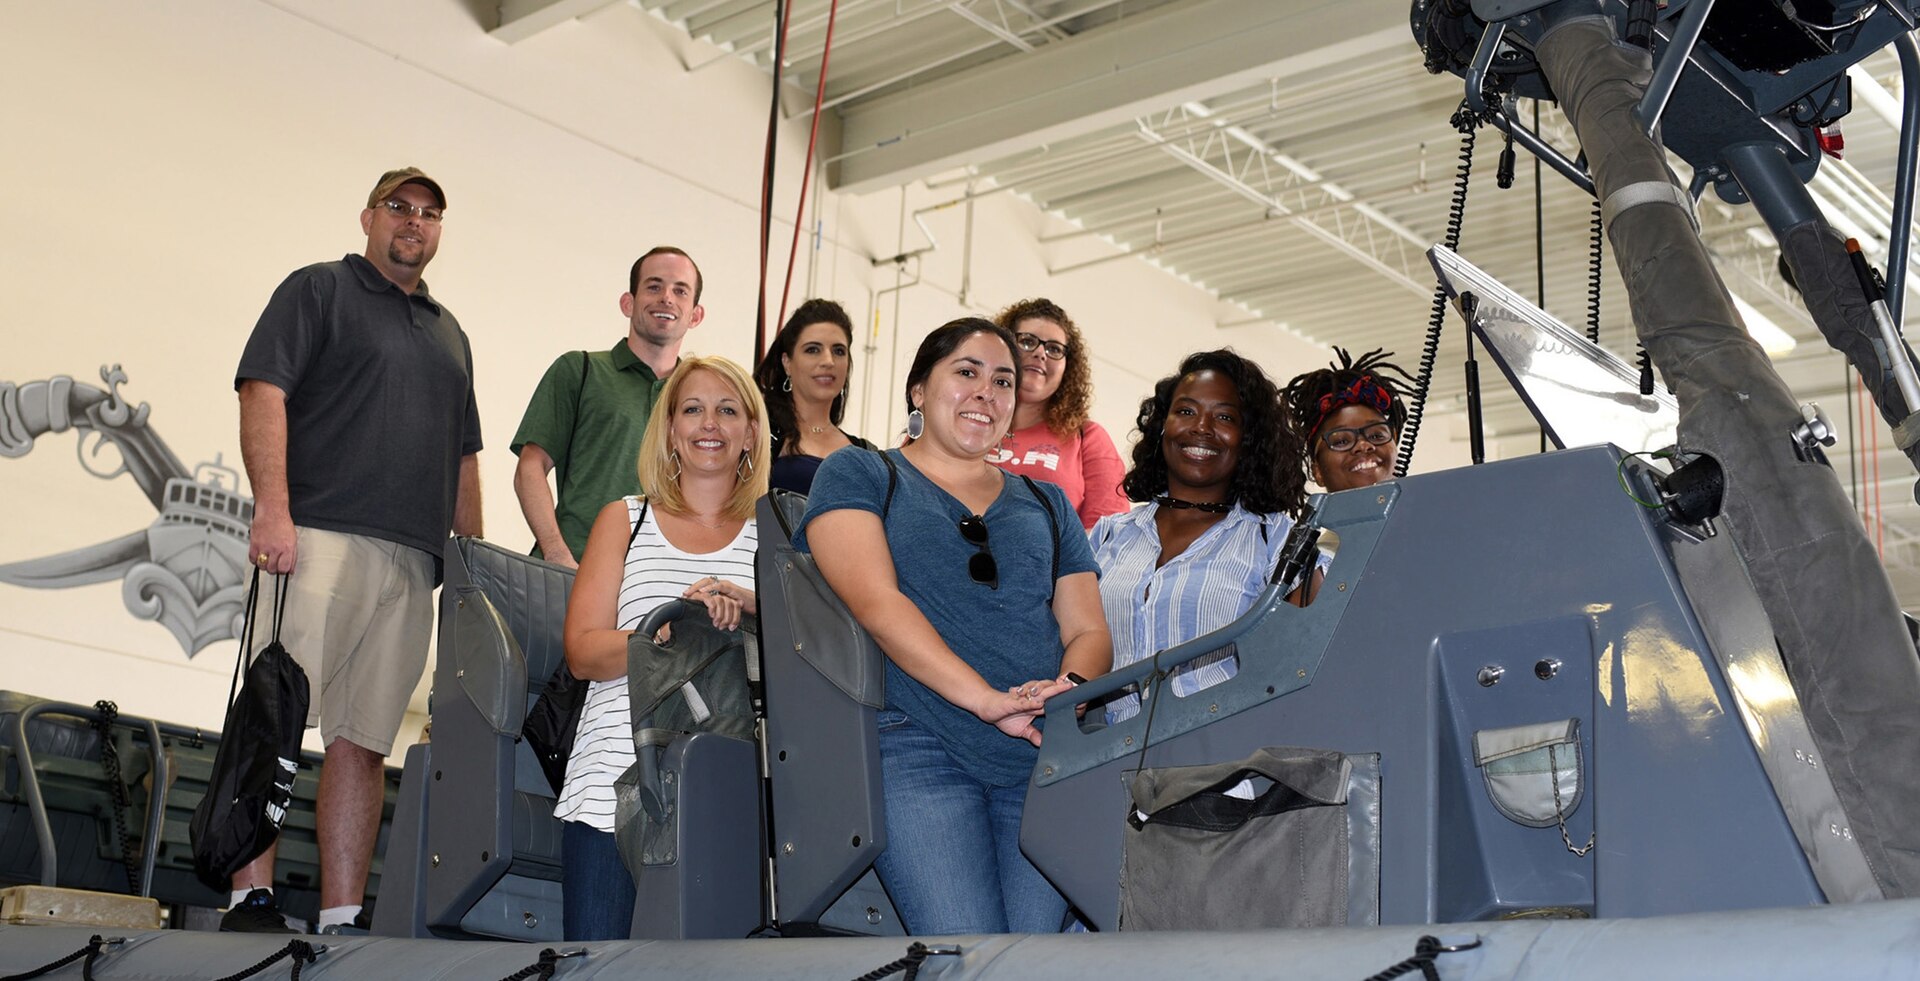 Central and South Texas educators and counselors, along with support personnel from Navy Recruiting District San Antonio, toured the Special Warfare Combatant-Craft Crewmen Training Center during the NRD’s annual Educator Orientation Visit July 11.